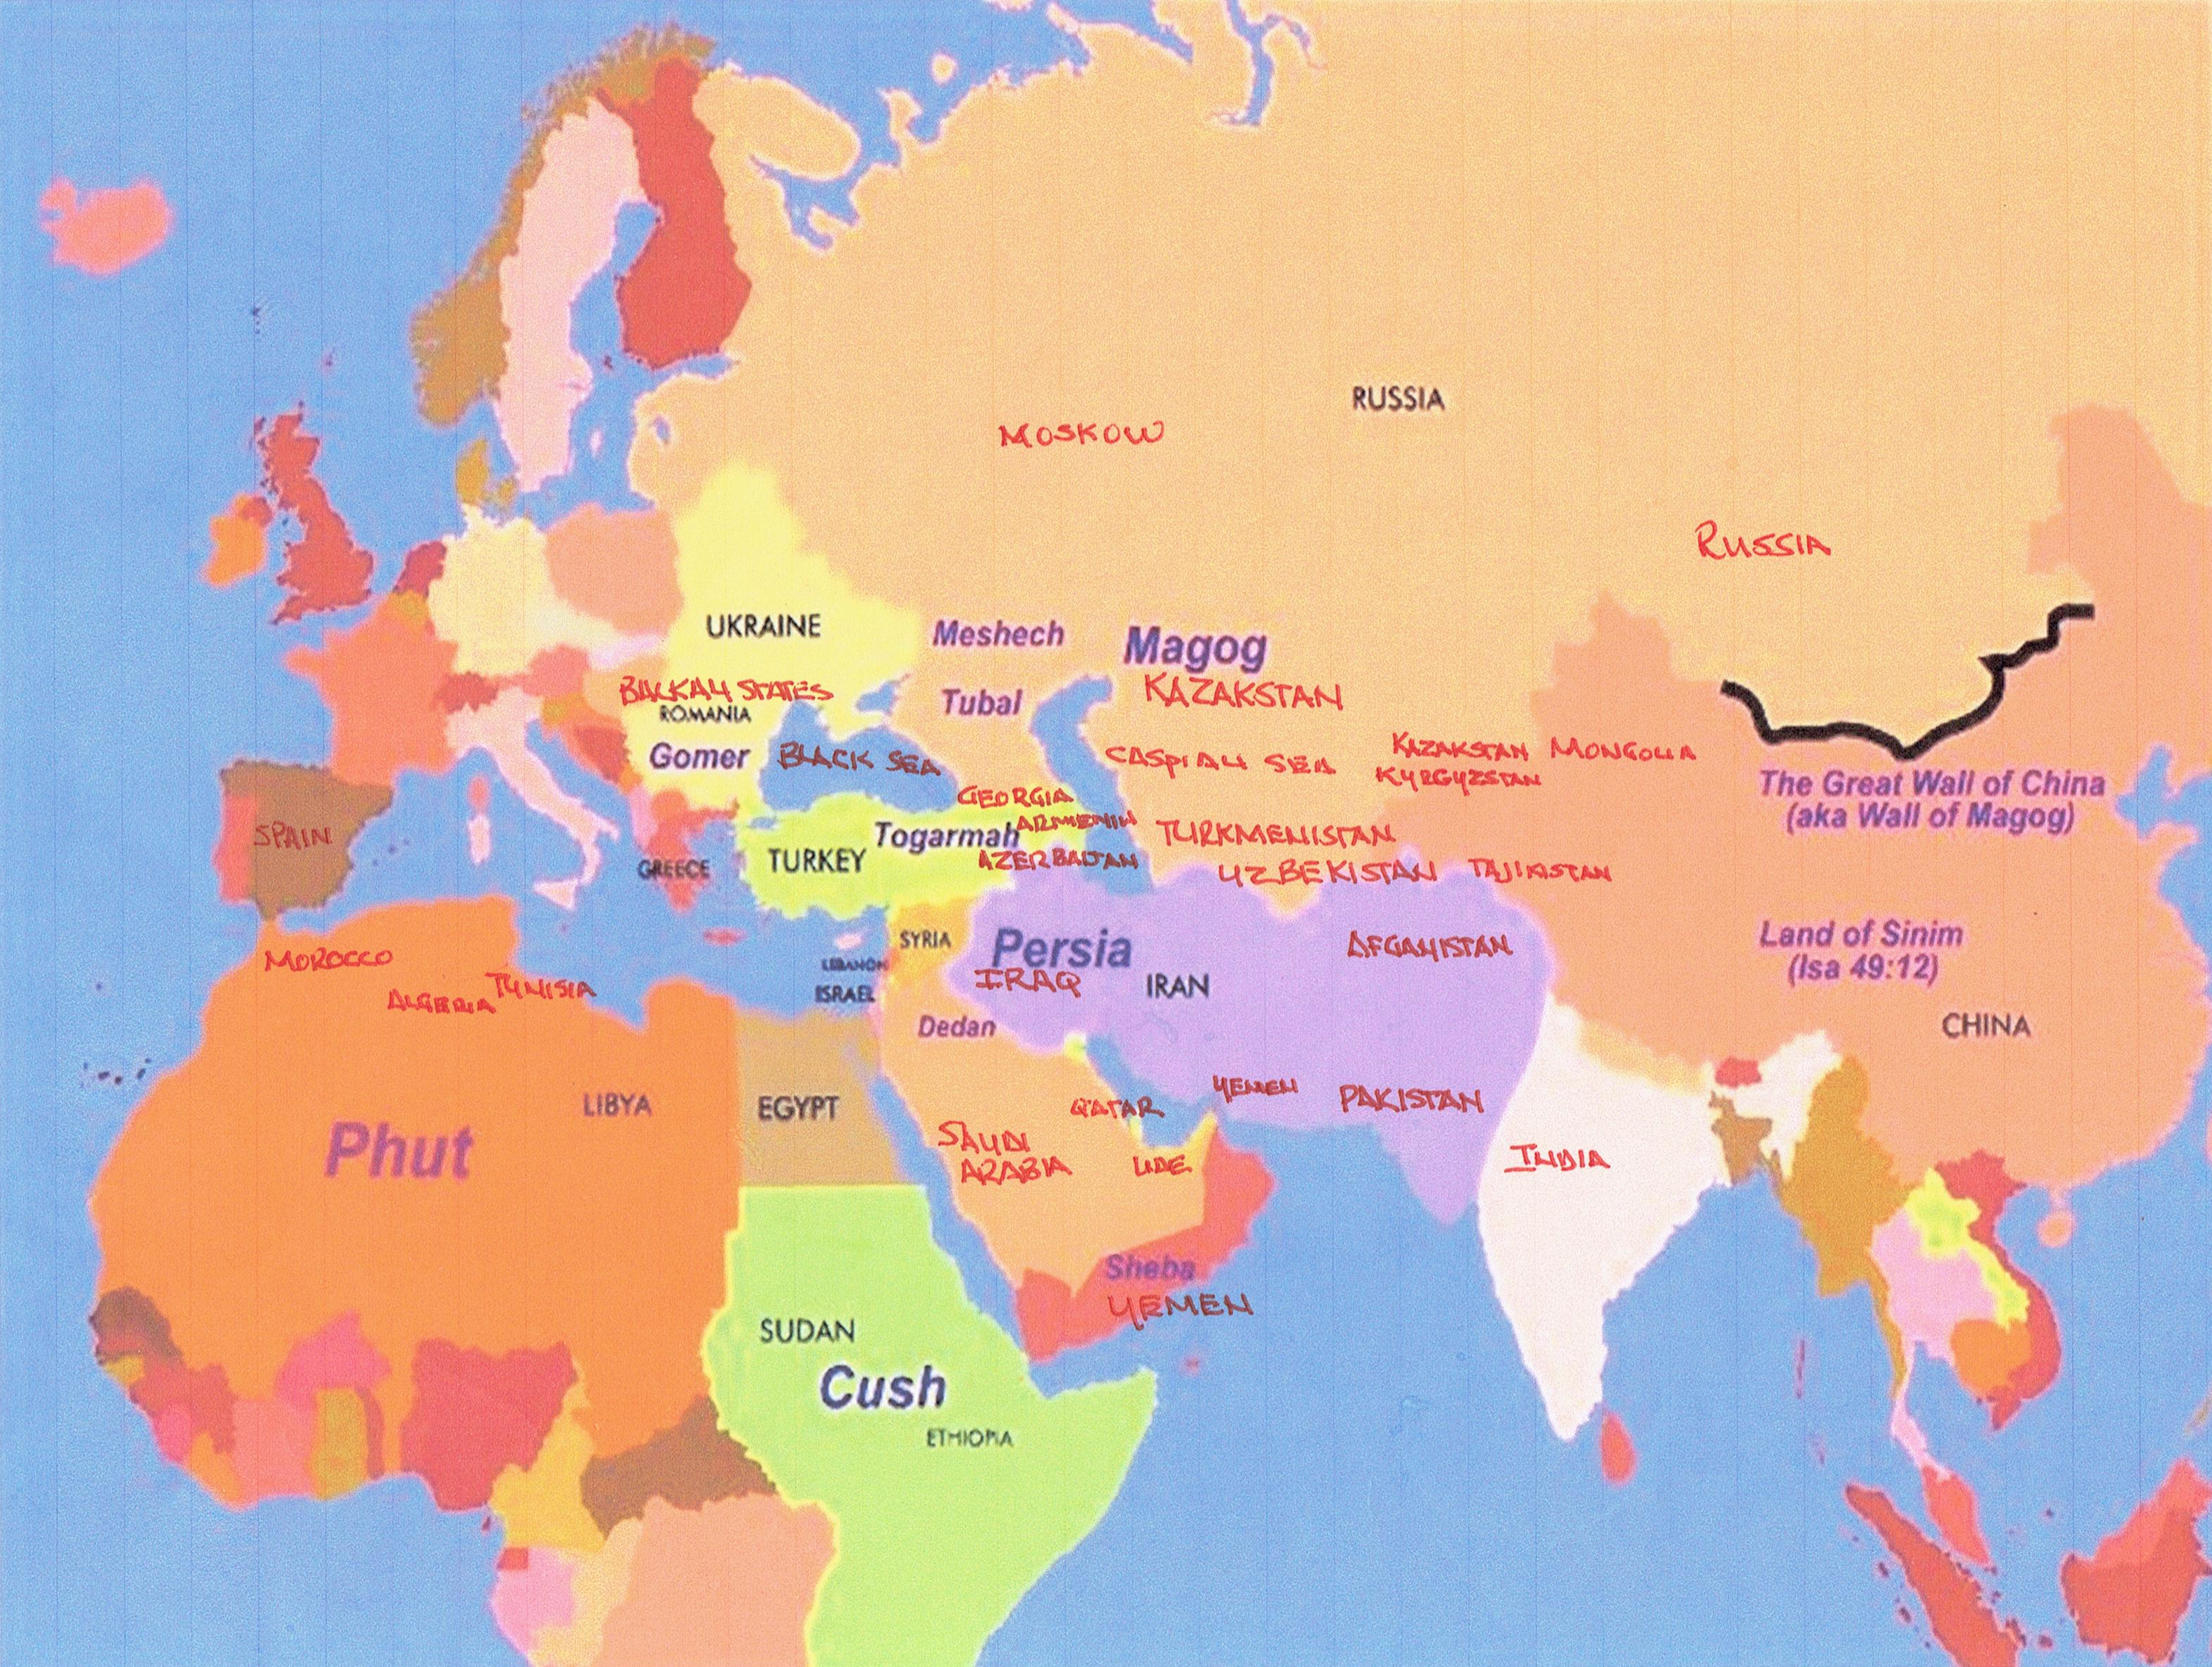 Map of Europe, Asia, Middle East, and North Africa